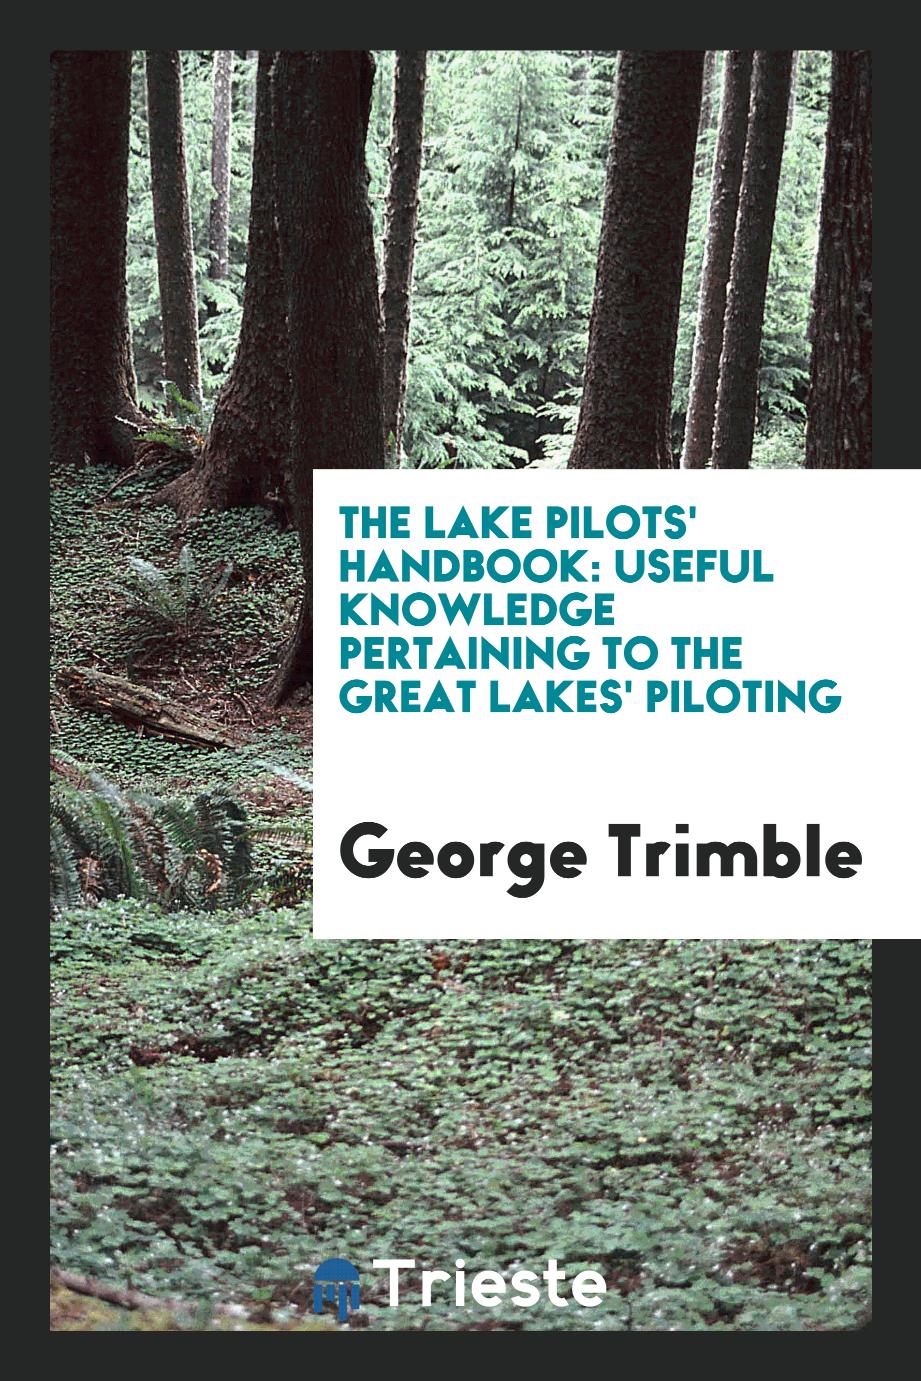 The Lake Pilots' Handbook: Useful Knowledge Pertaining to the Great Lakes' Piloting